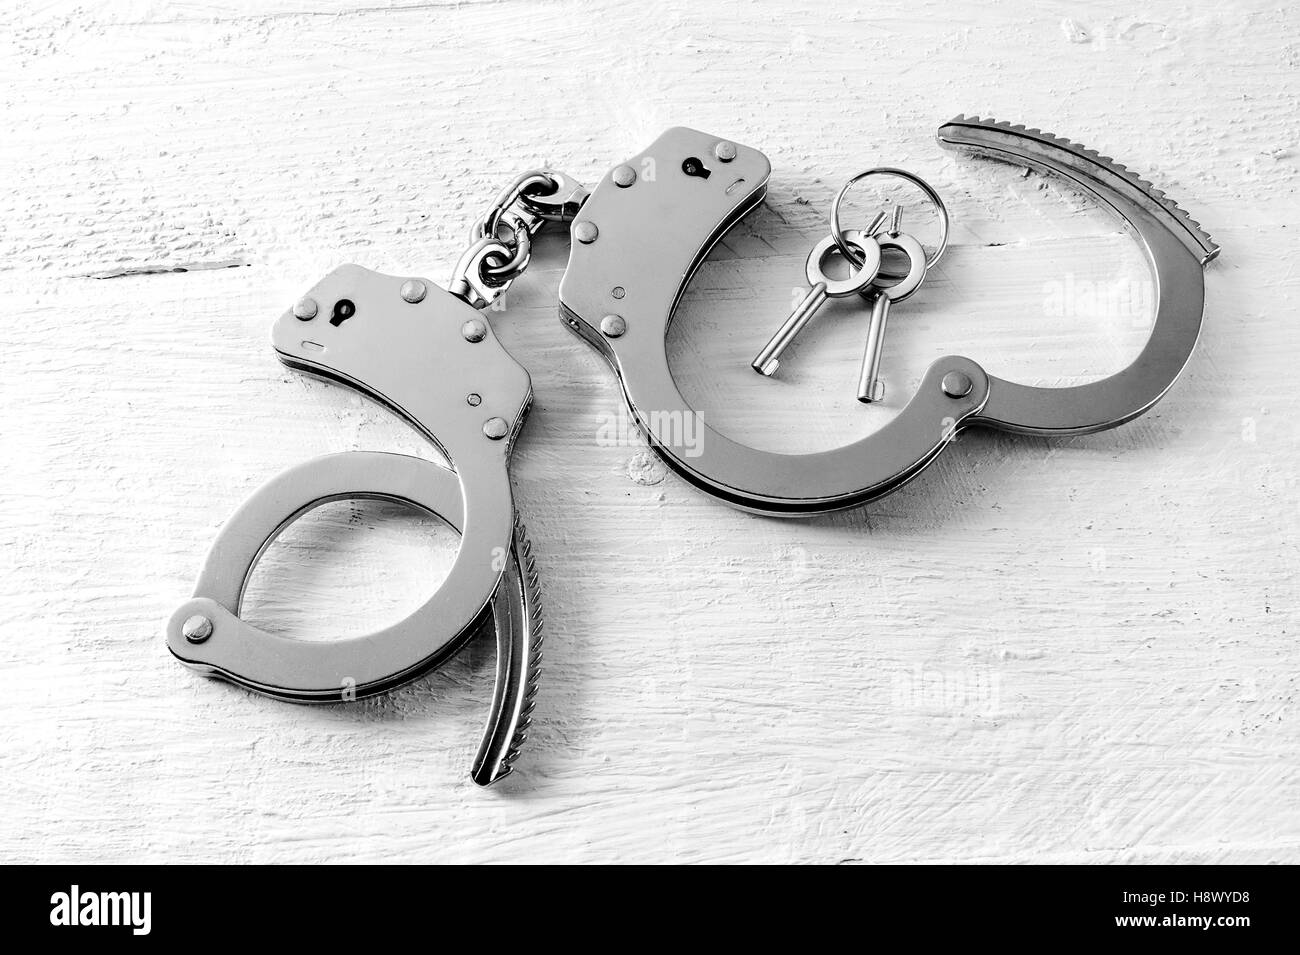 Pair of open handcuffs with the keys alongside lying on a textured white wooden board in a close up high angle view Stock Photo